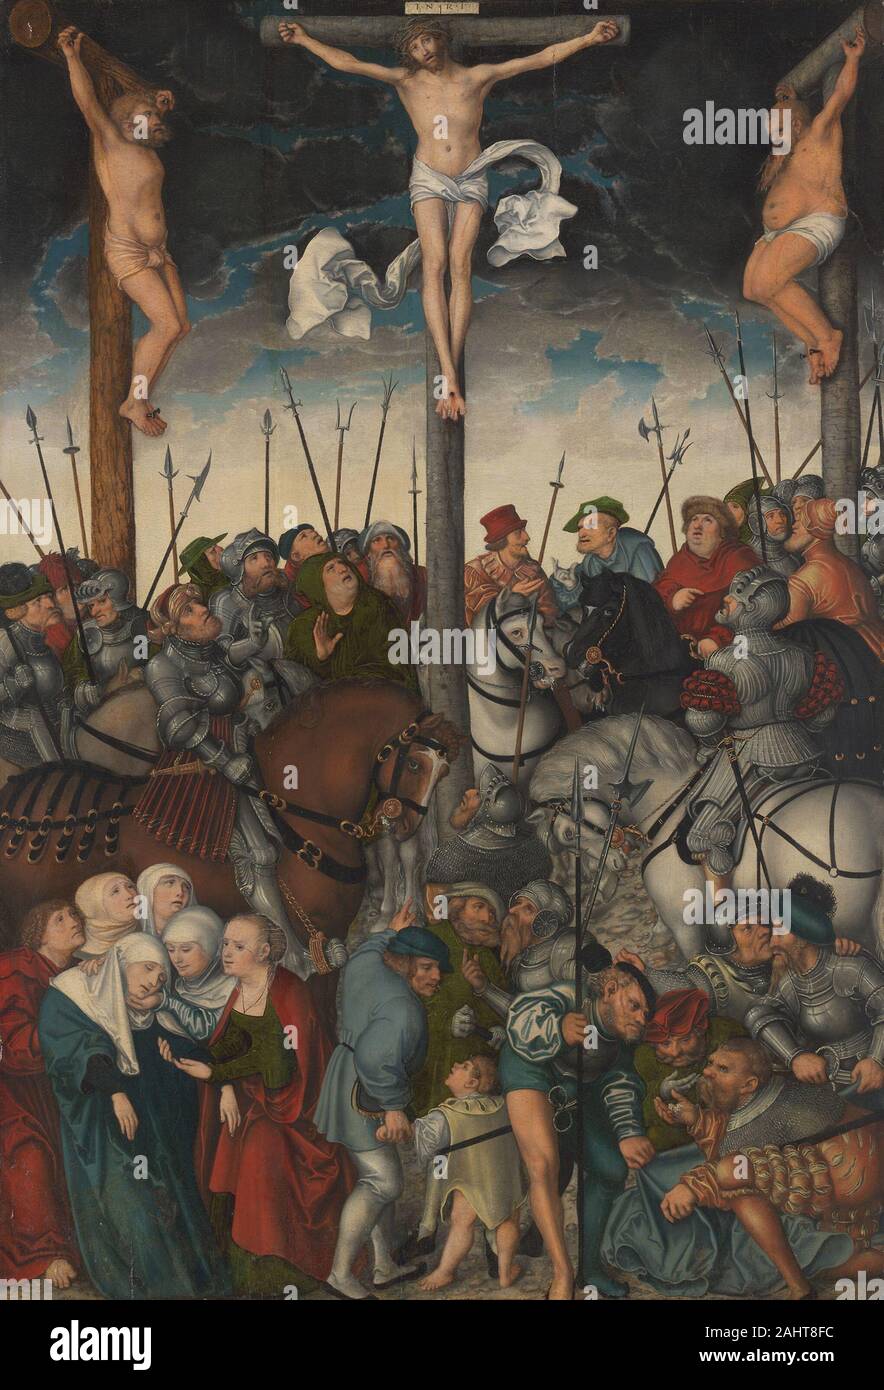 Lucas Cranach, the Elder. The Crucifixion. 1538. Germany. Oil on panel In this crowded scene, traditional vignettes from the Crucifixion story surround the central figure of Christ on the cross. The swooning Virgins and other believers are represented at Christ’s right hand. On the other, less-favored side of the cross are Christ’s condemners and the cynics who rejected him, among them the soldiers who cast dice to divide up his clothing. Although Lucas Cranach the Elder was a friend of Martin Luther and a firm supporter of the Reformation, his highly successful workshop produced altarpieces f Stock Photo